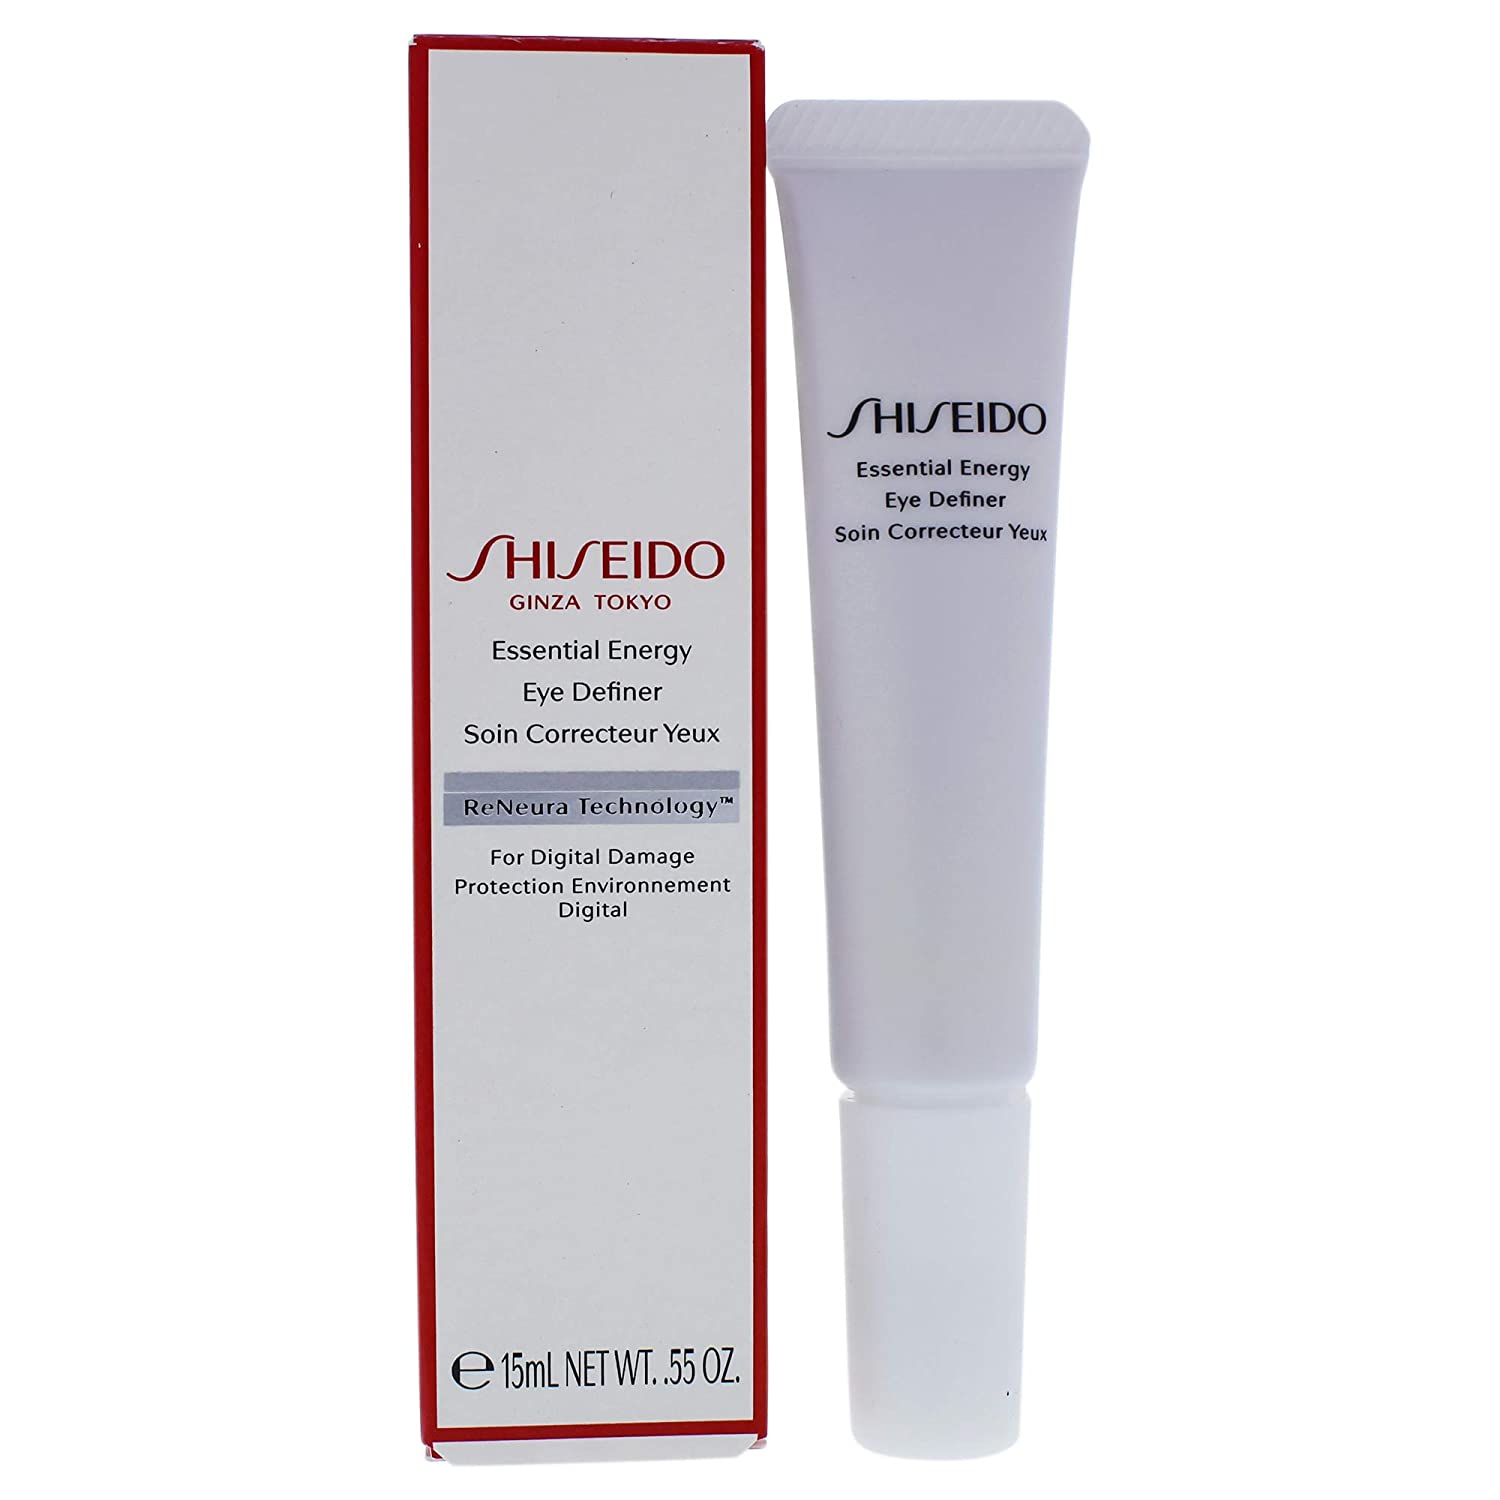 Shiseido Facial Treatment on Site Pack of 1 (1 x 15 ml)